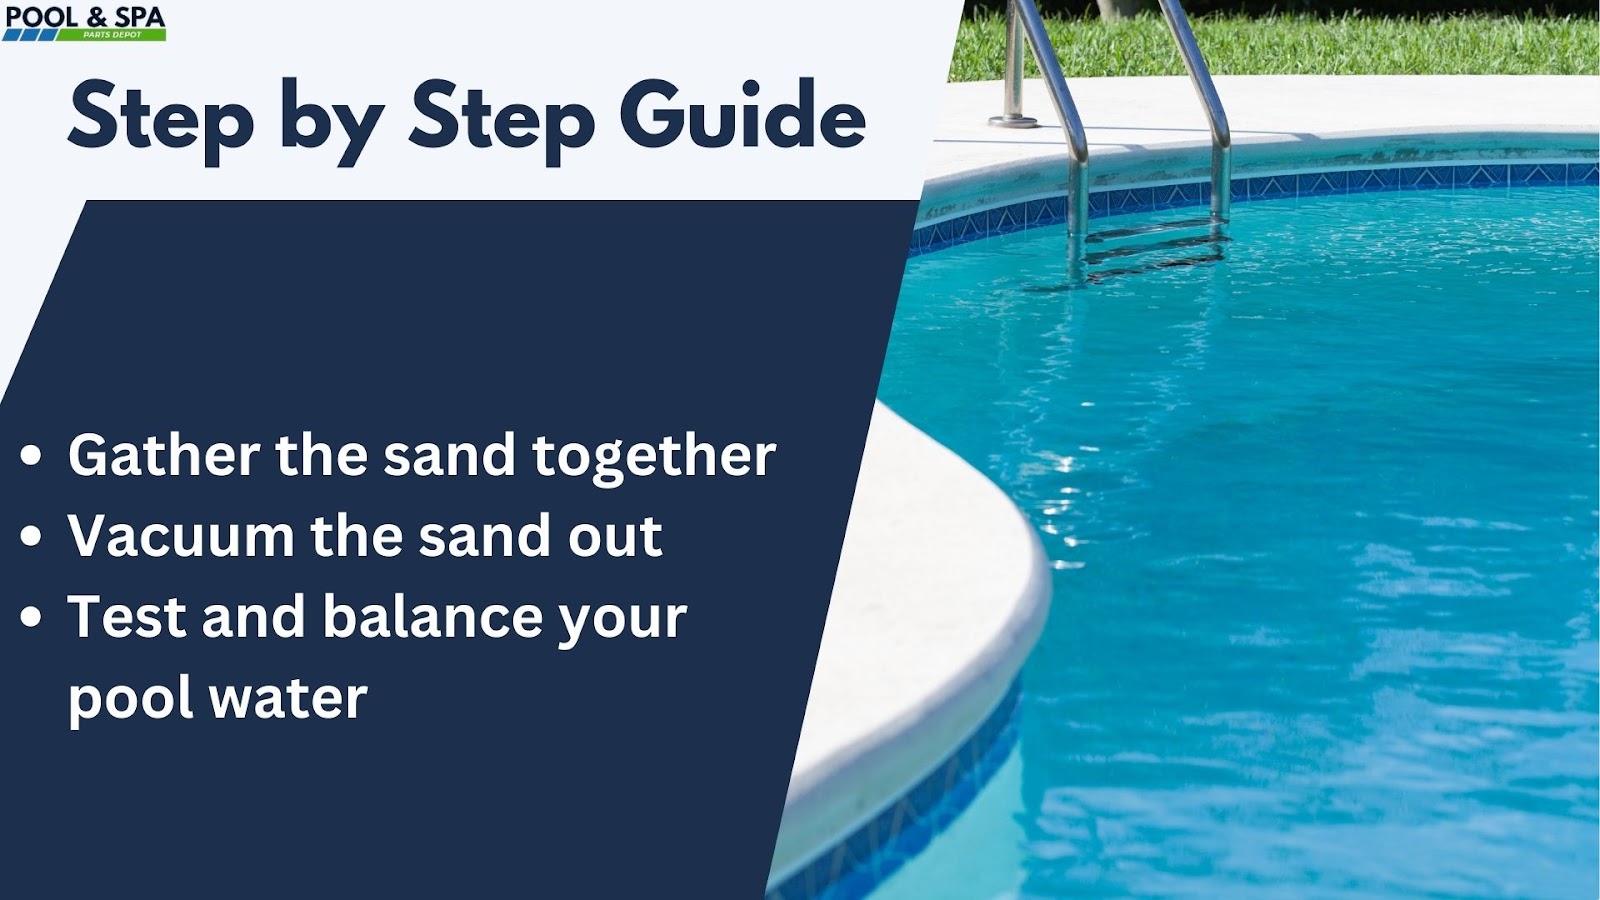 Step-by-Step Guide to Removing Sand from Your Pool